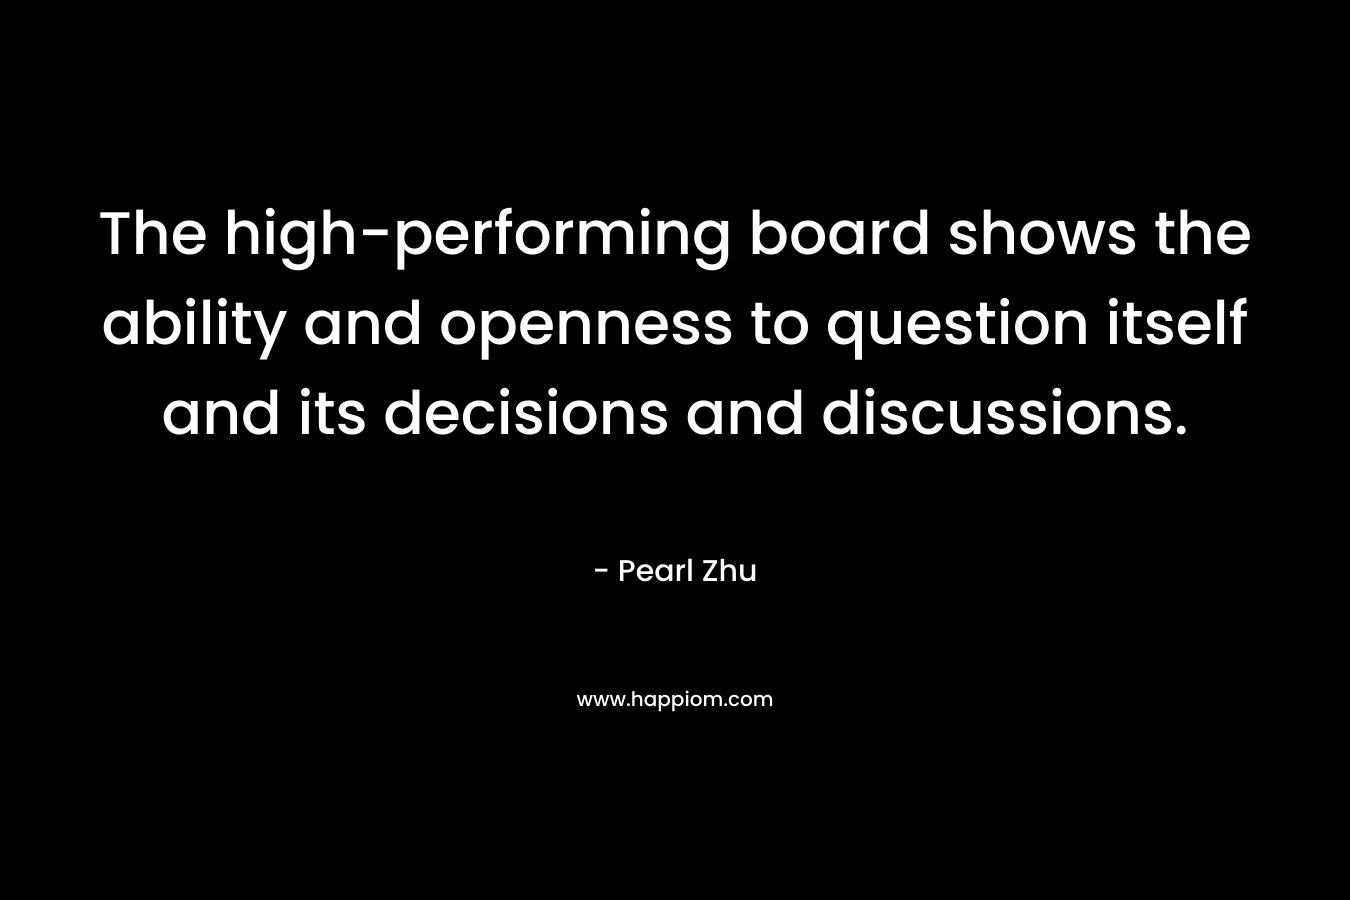 The high-performing board shows the ability and openness to question itself and its decisions and discussions. – Pearl Zhu